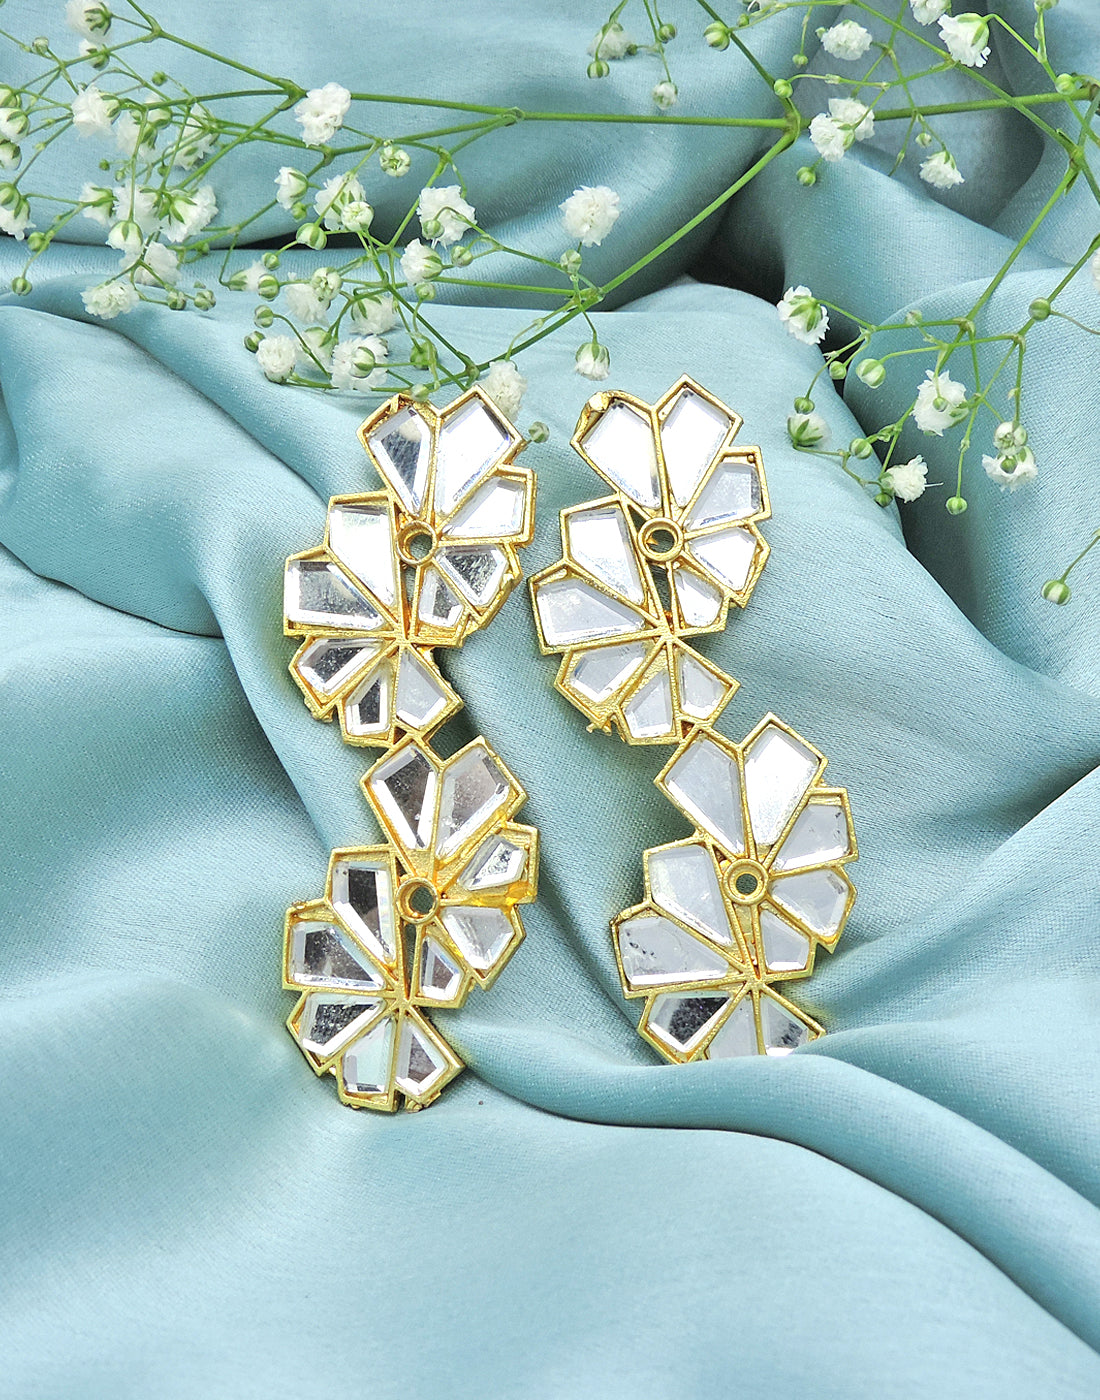 Crystal Cascade Earrings - Statement Earrings - Gold-Plated & Hypoallergenic - Made in India - Dubai Jewellery - Dori